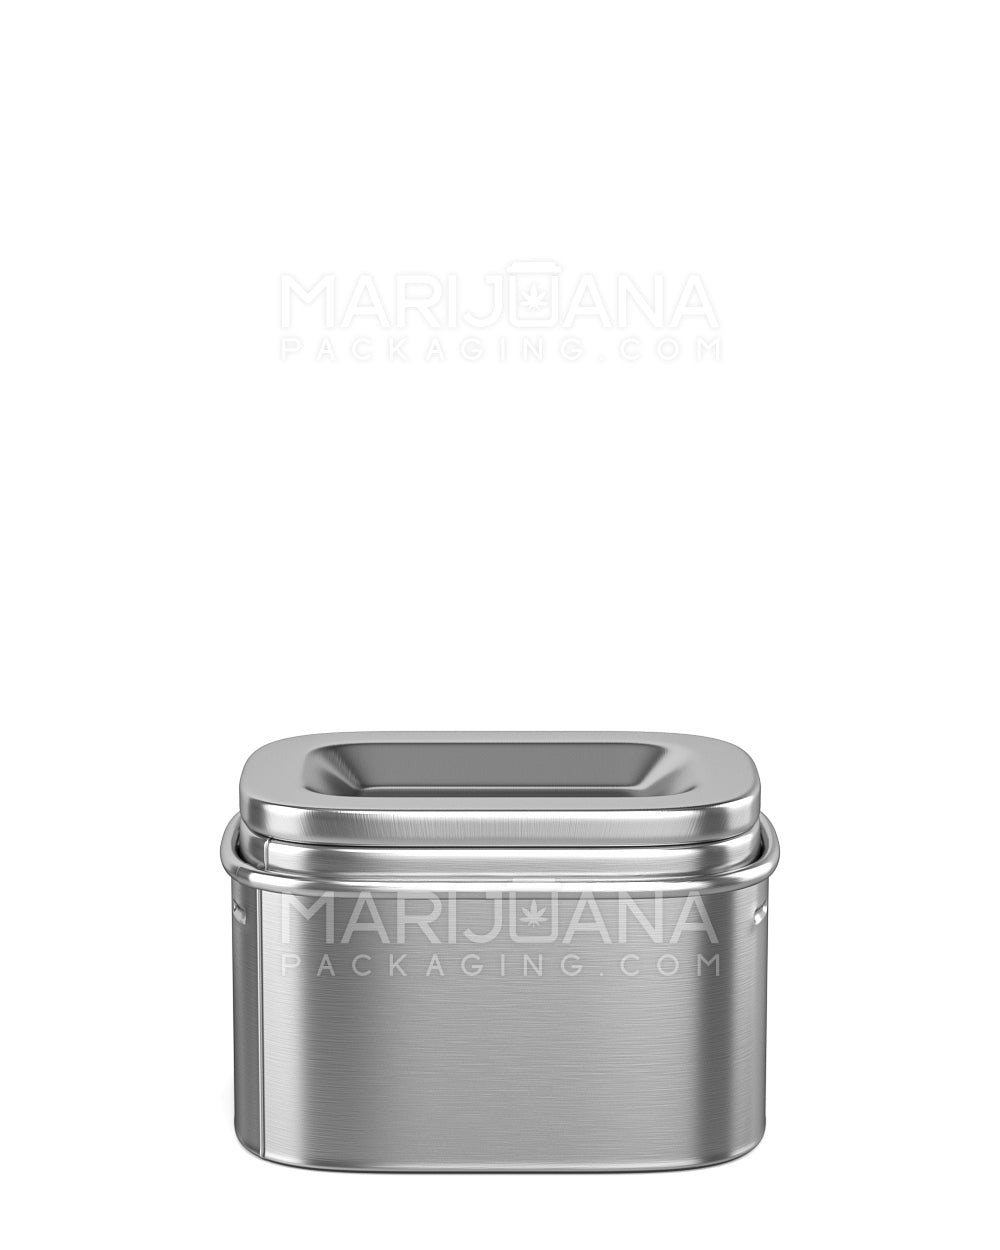 Child Resistant & Sustainable | 100% Recyclable PushTin Small Container | 1oz - Silver Tin - 250 Count - 13